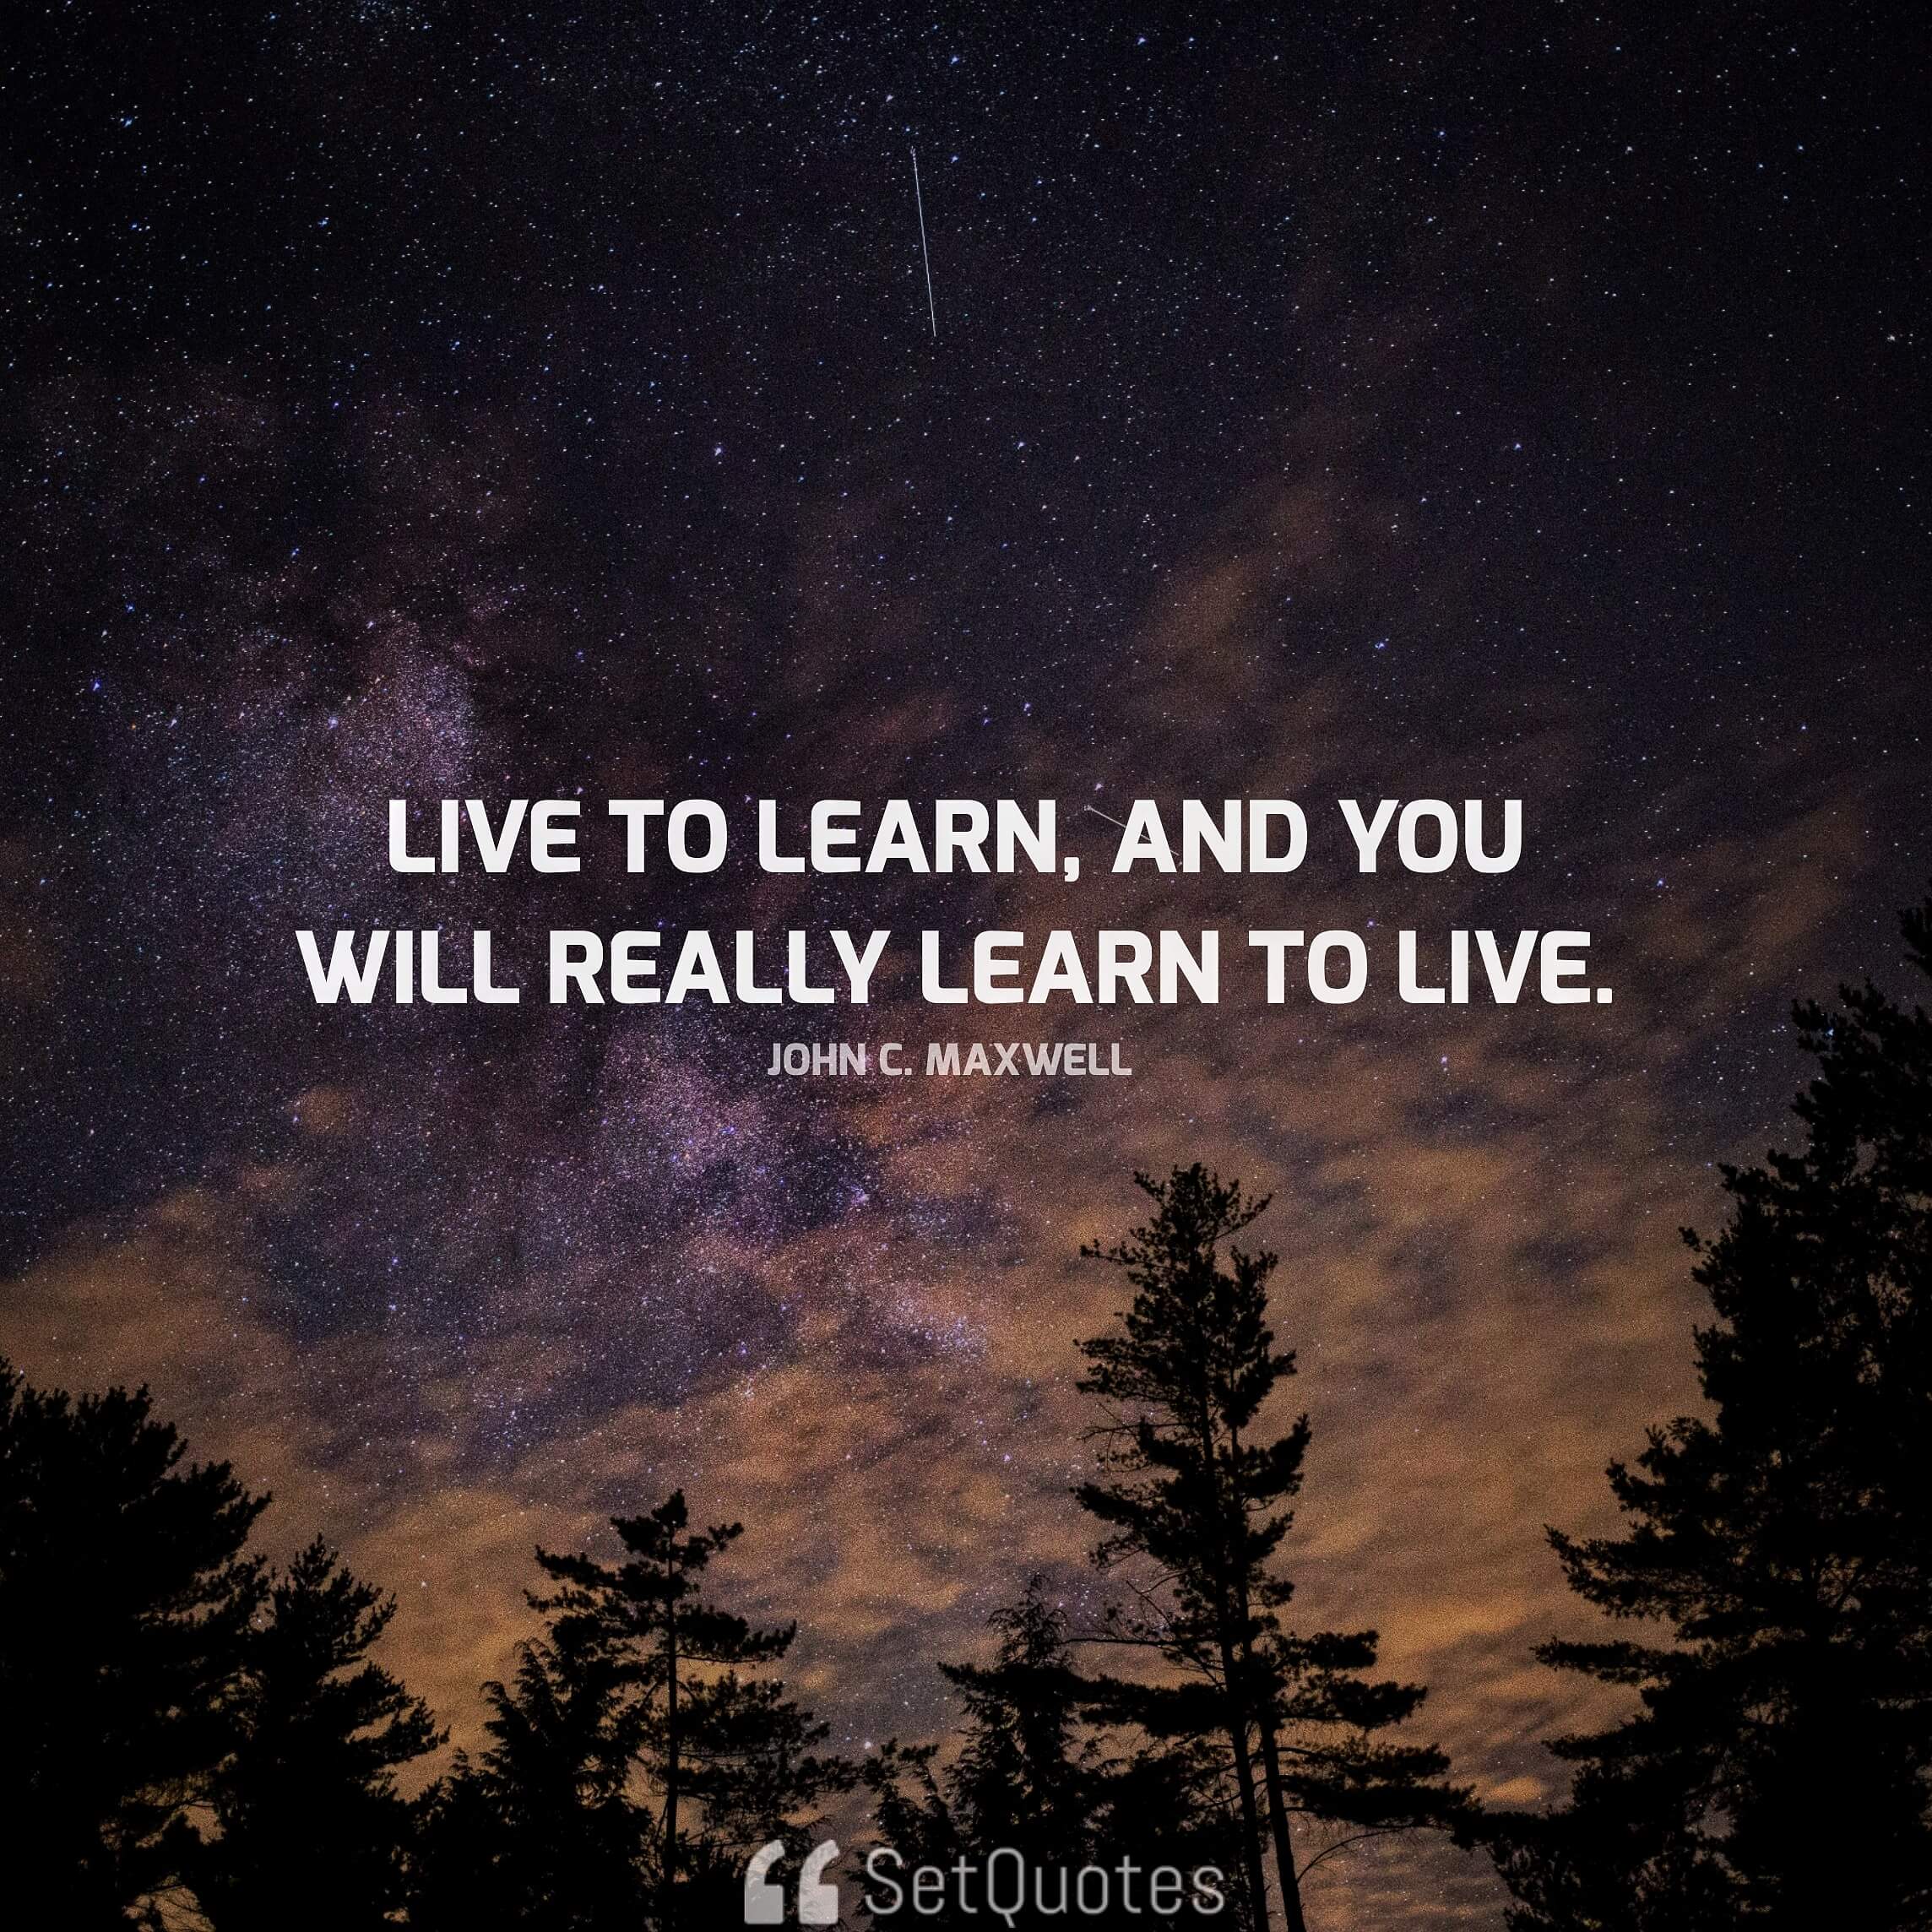 Live to learn, and you will really learn to live. - John C. Maxwell